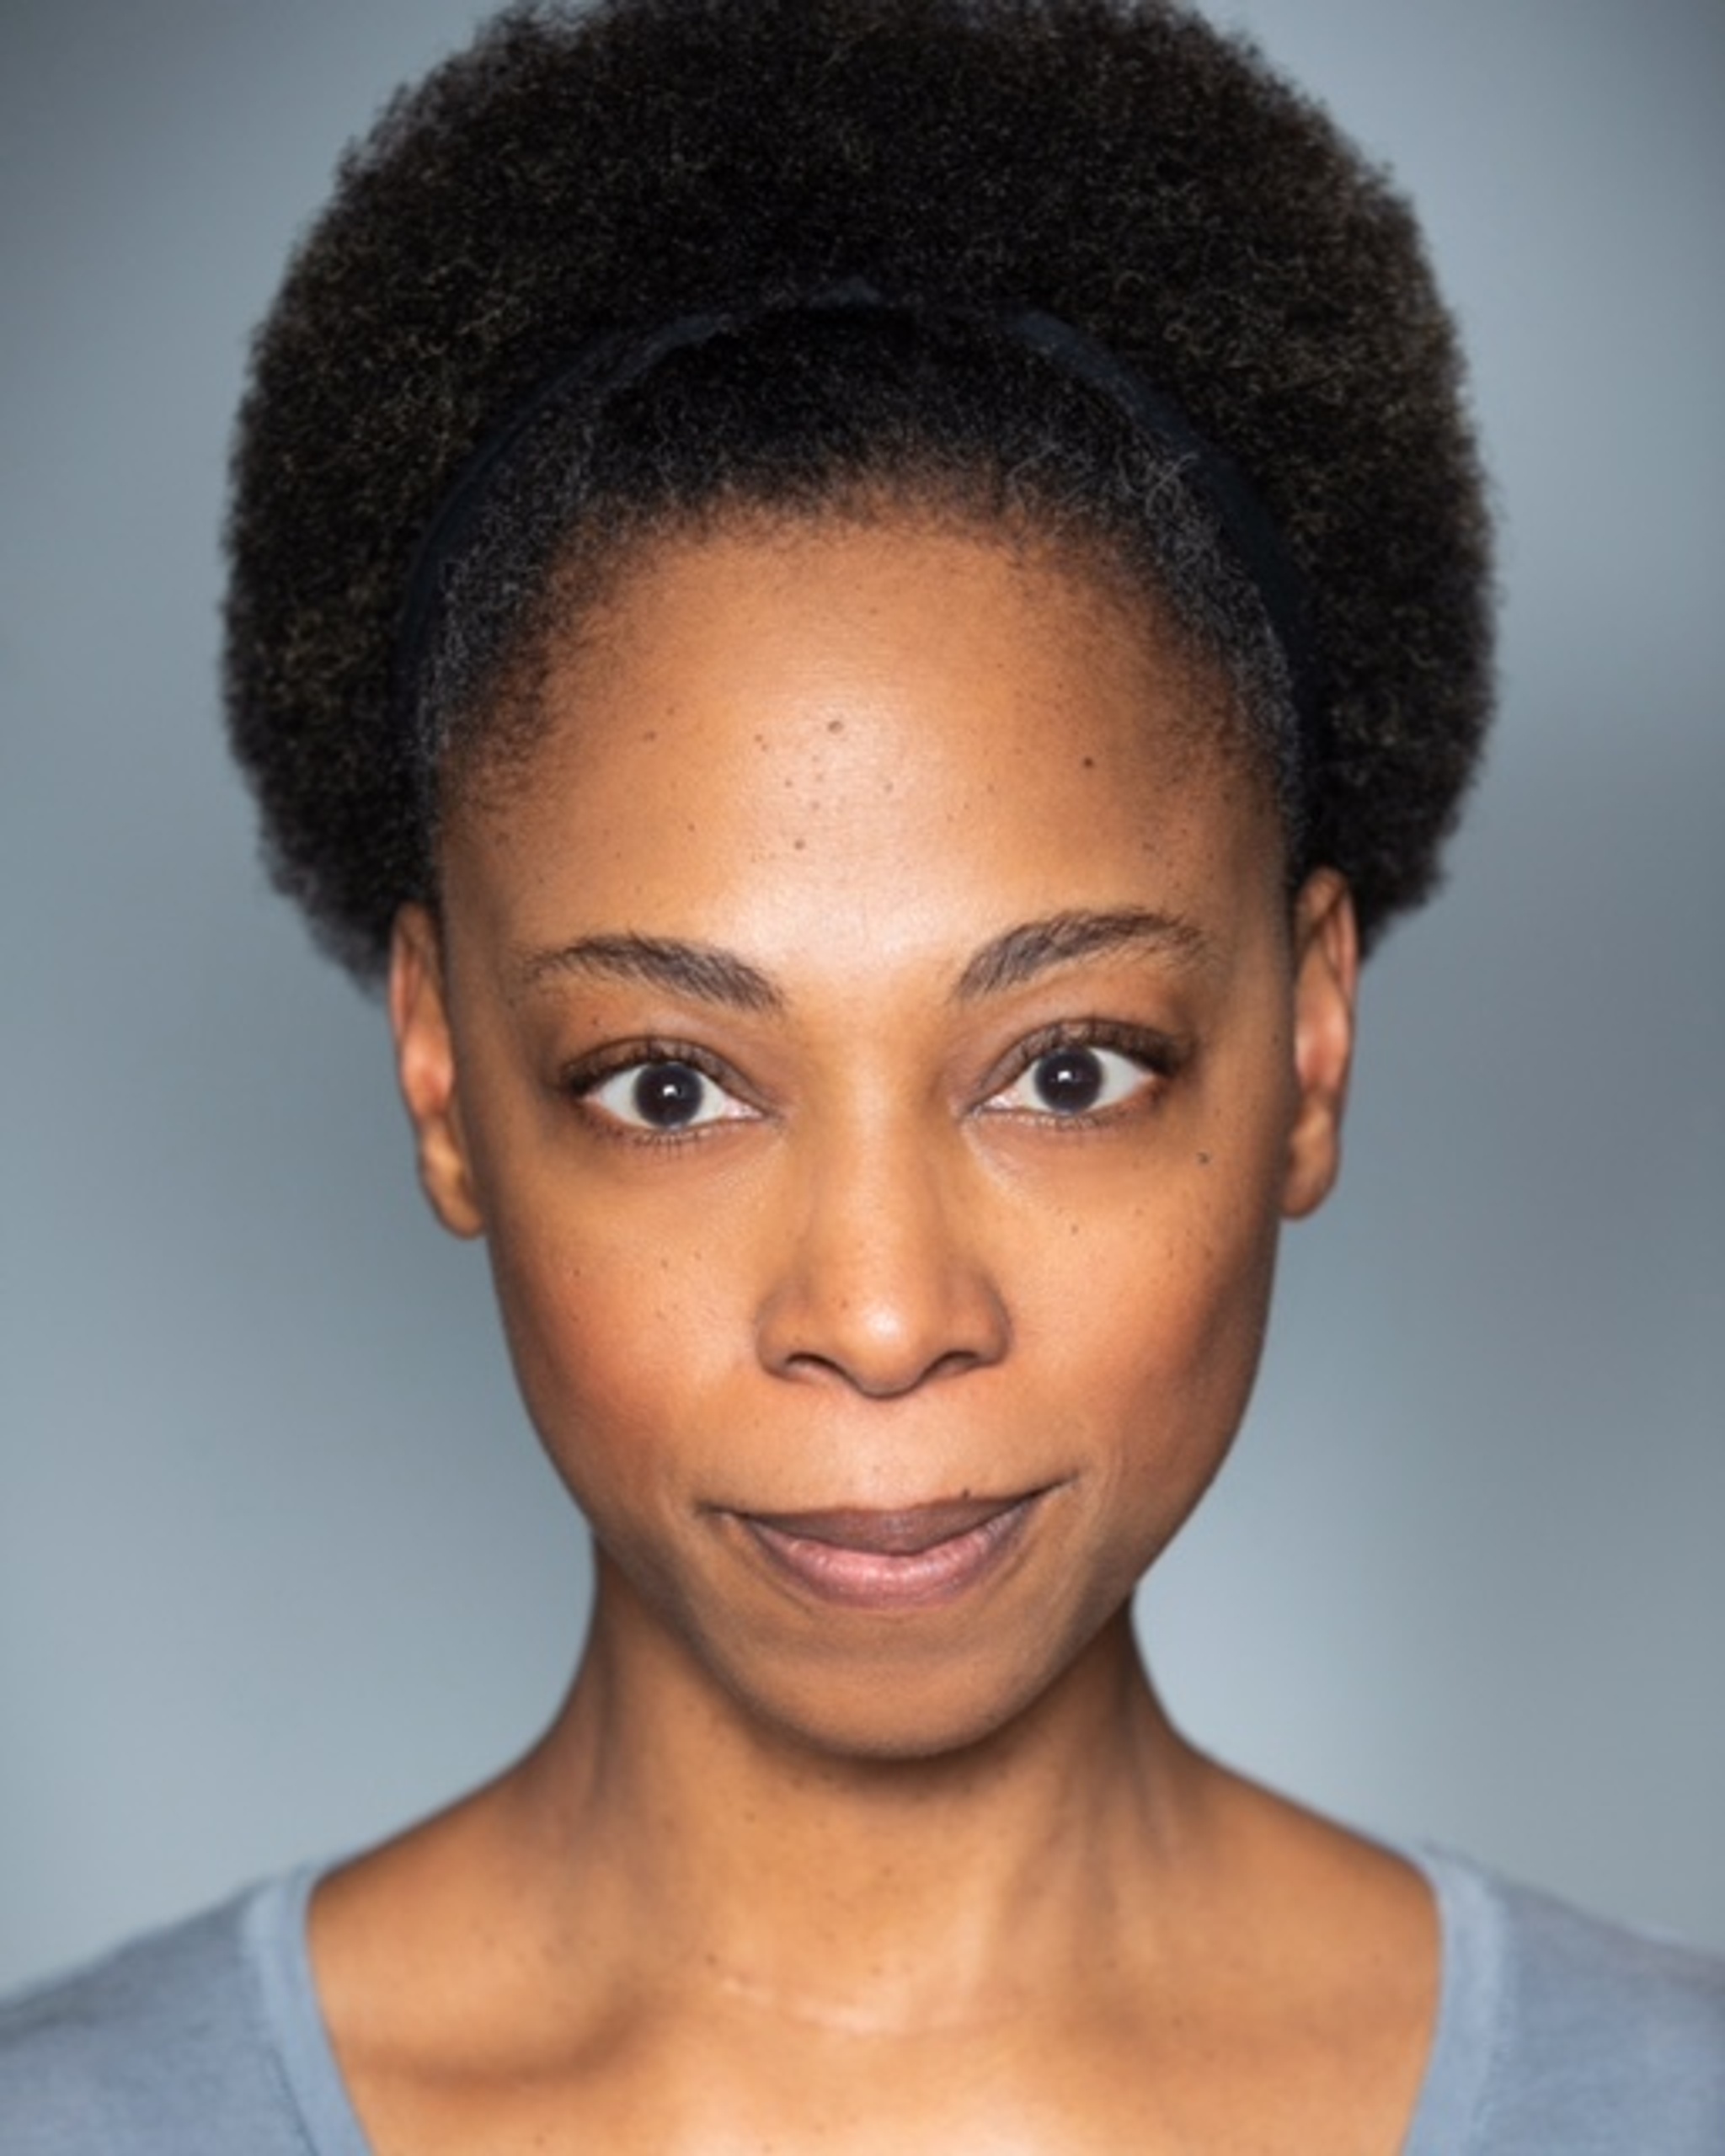 A portrait of actor Alana Maria, a Black woman with her hair pulled back so it fans out behind her head. She smiles slightly without opening her mouth.